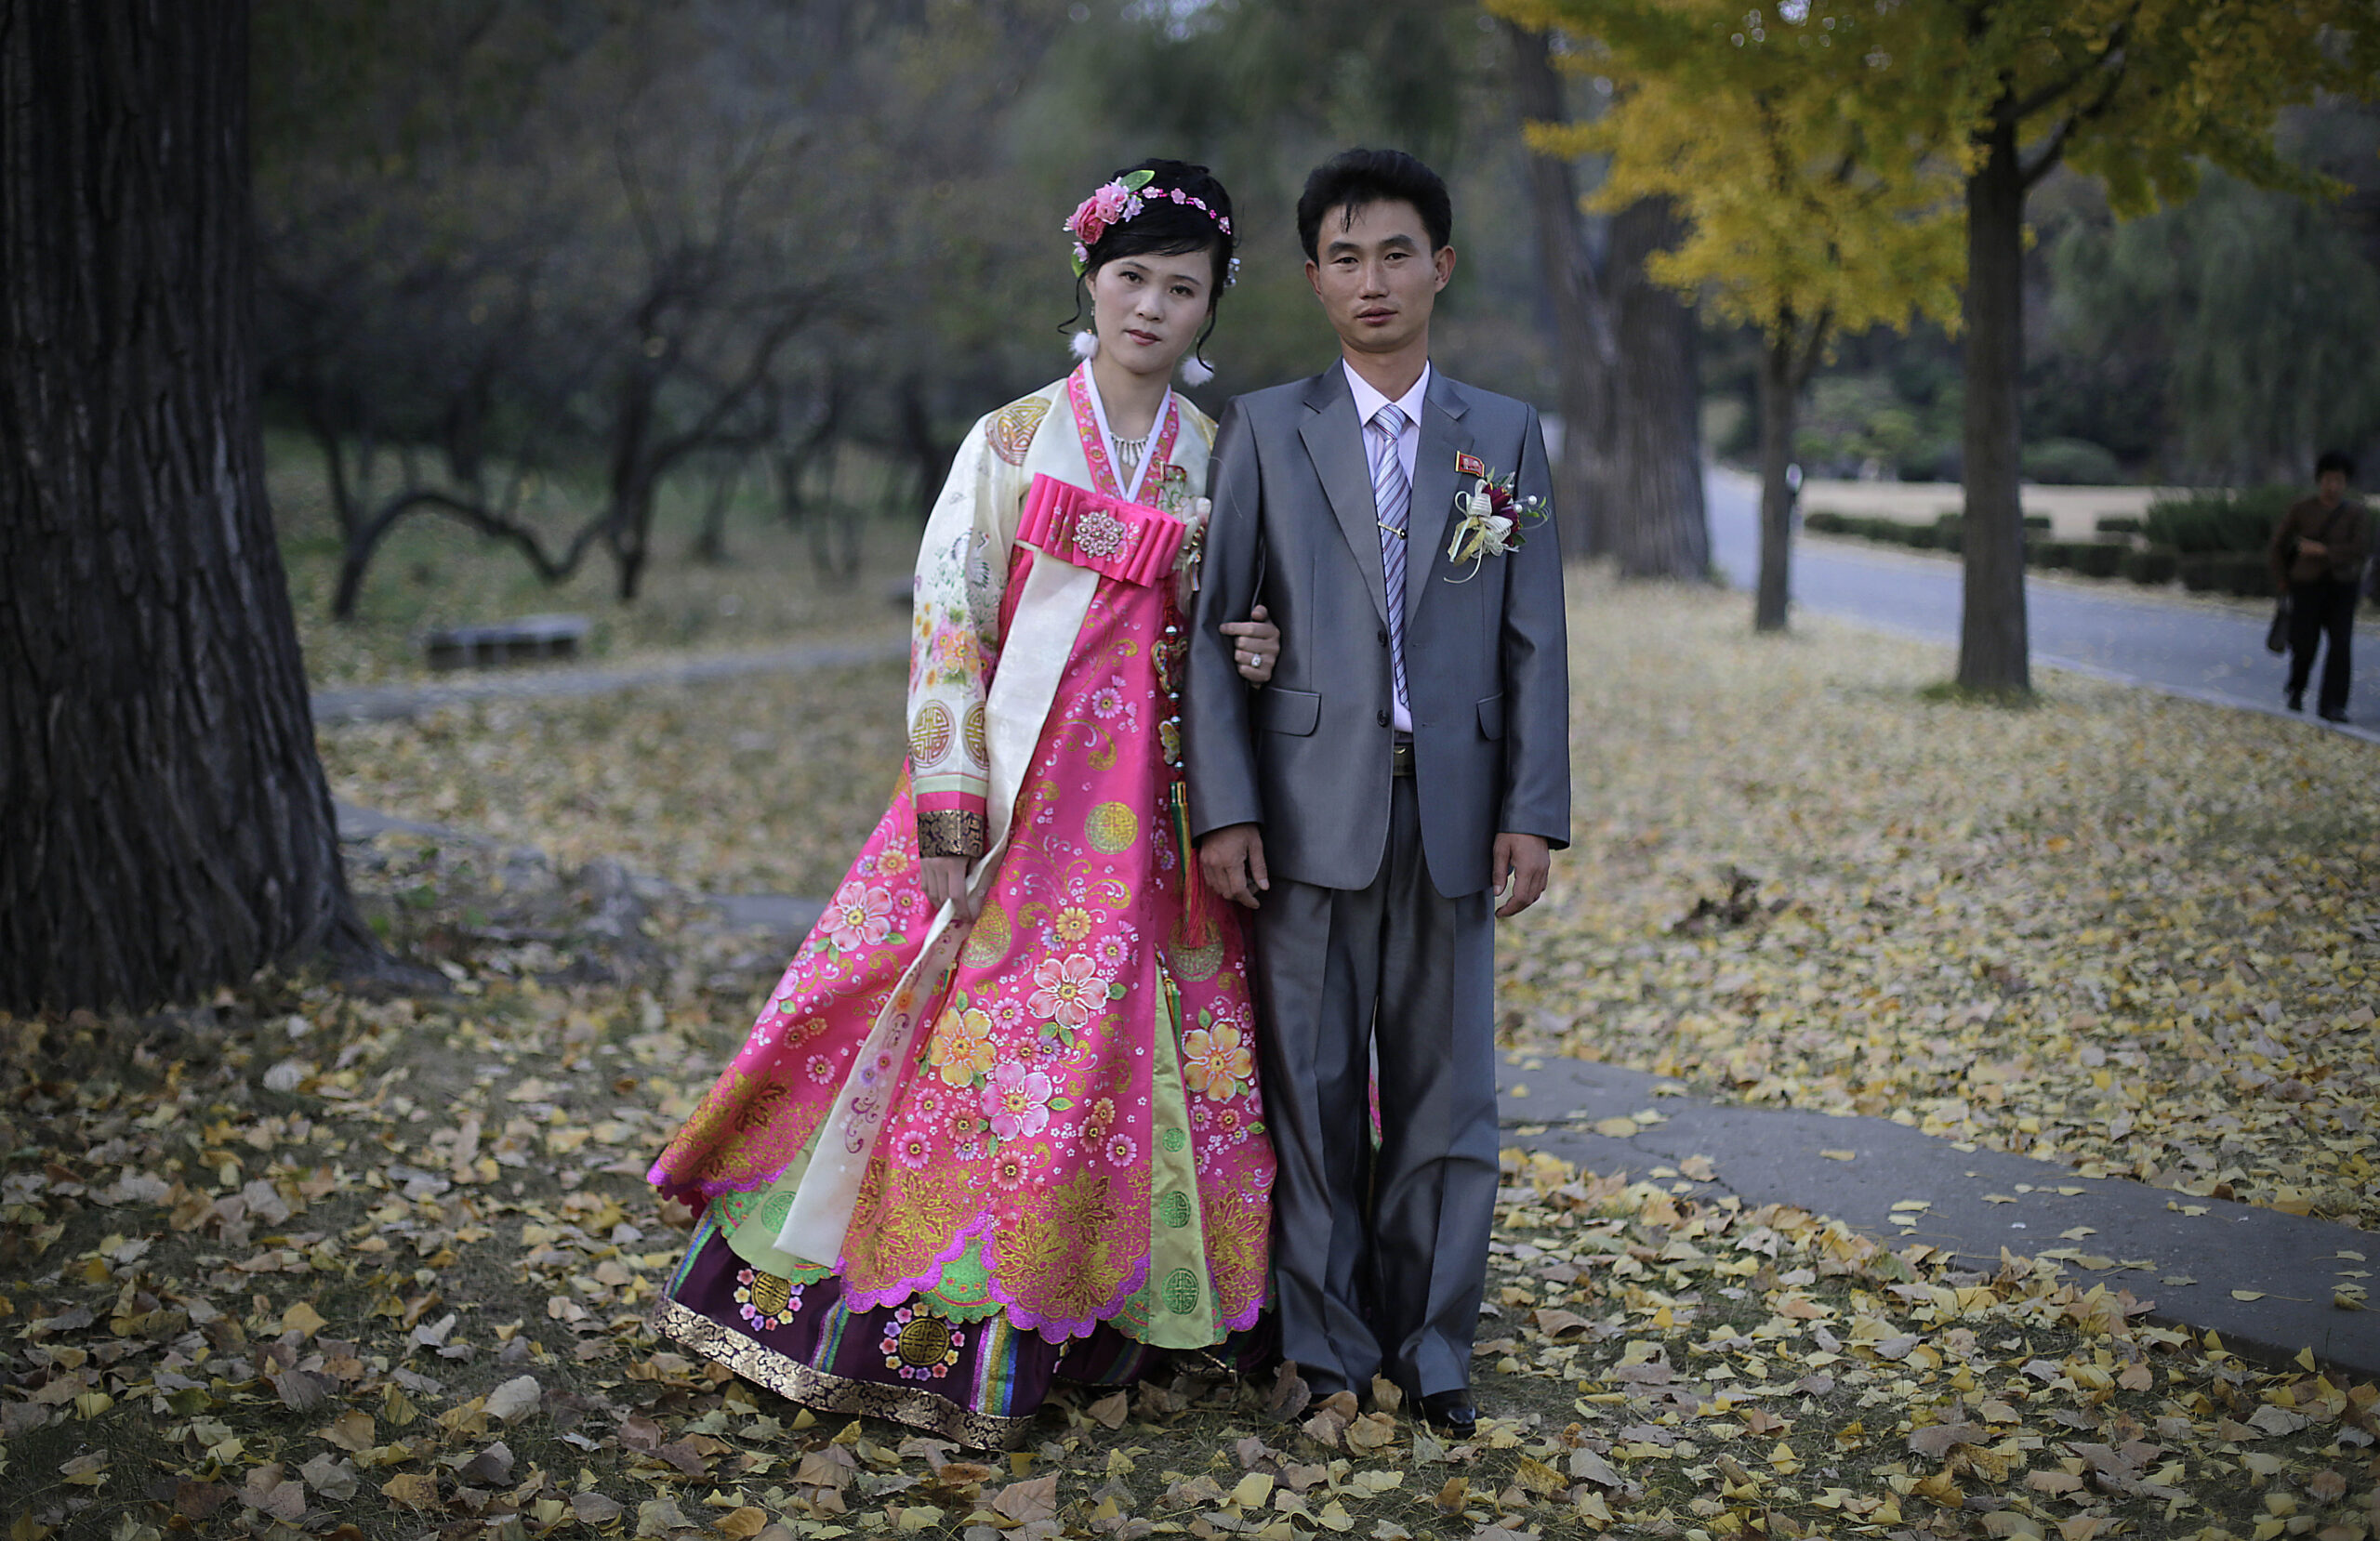 In this photo taken Saturday, Oct. 25, 2014, a North Korean bride and groom pose for a photograph at the Moranbong hill where they went to take wedding pictures, in Pyongyang, North Korea. The couple, Ri Ok Ran, 28 and Kang Sung Jin, 32, were married Saturday after dating for about two years. This is one of over 70 photos that will be on display at Objectifs in Singapore. (AP Photo/Wong Maye-E) 